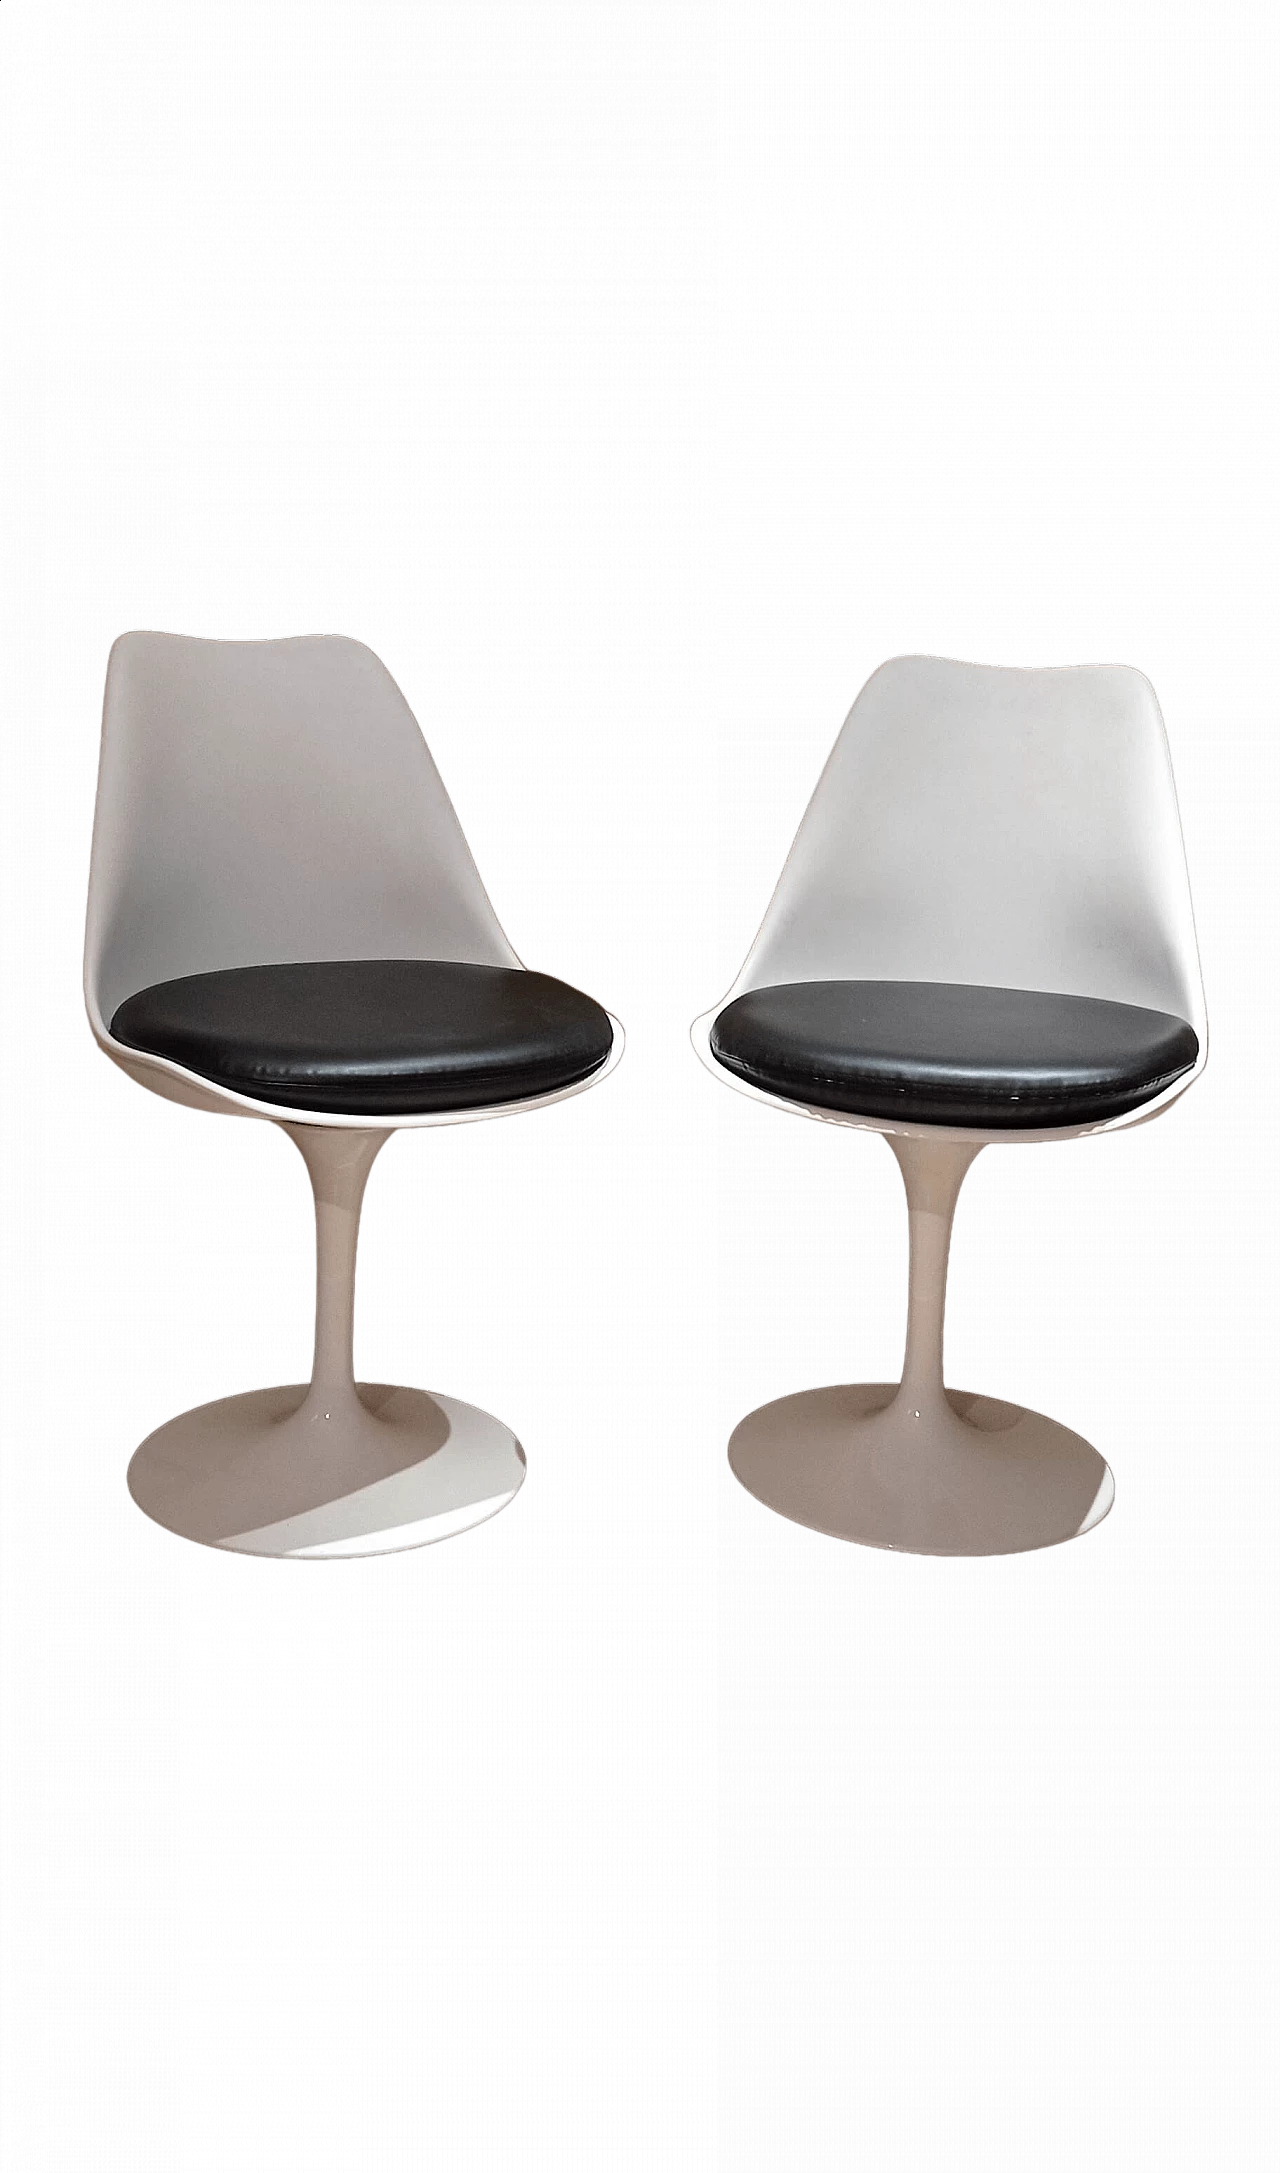 Pair of white Tulip 769-S chairs with black leather cushion by Eero Saarinen for Alivar, 1990s 121